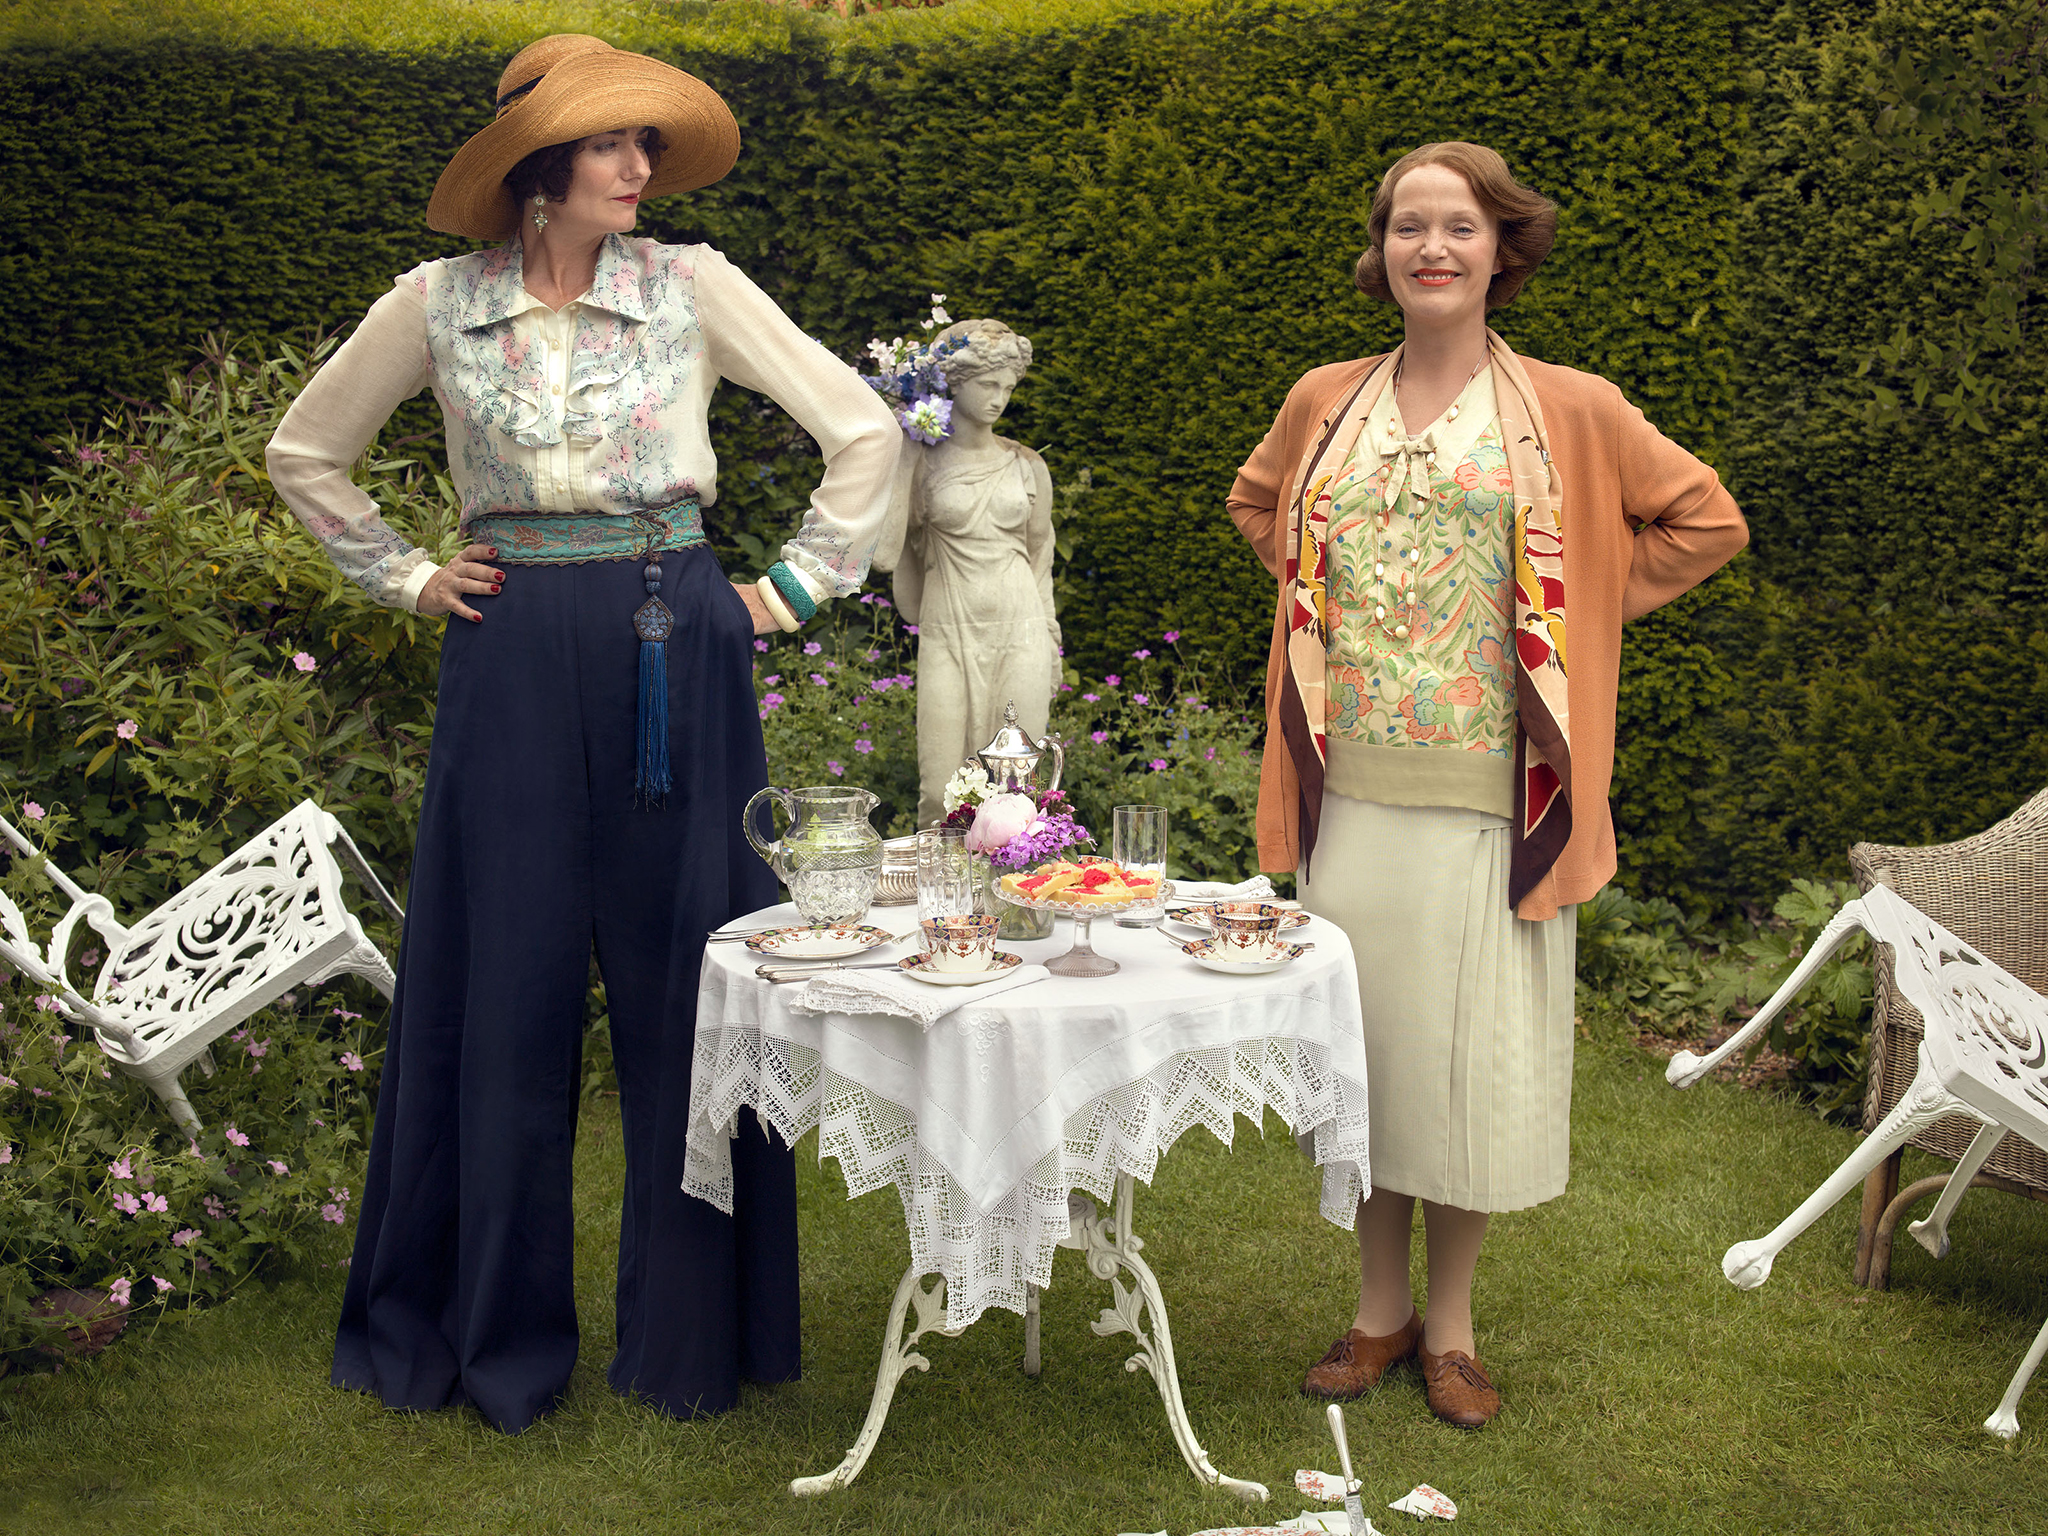 Mapp and Lucia. Source: theindependant.co.uk